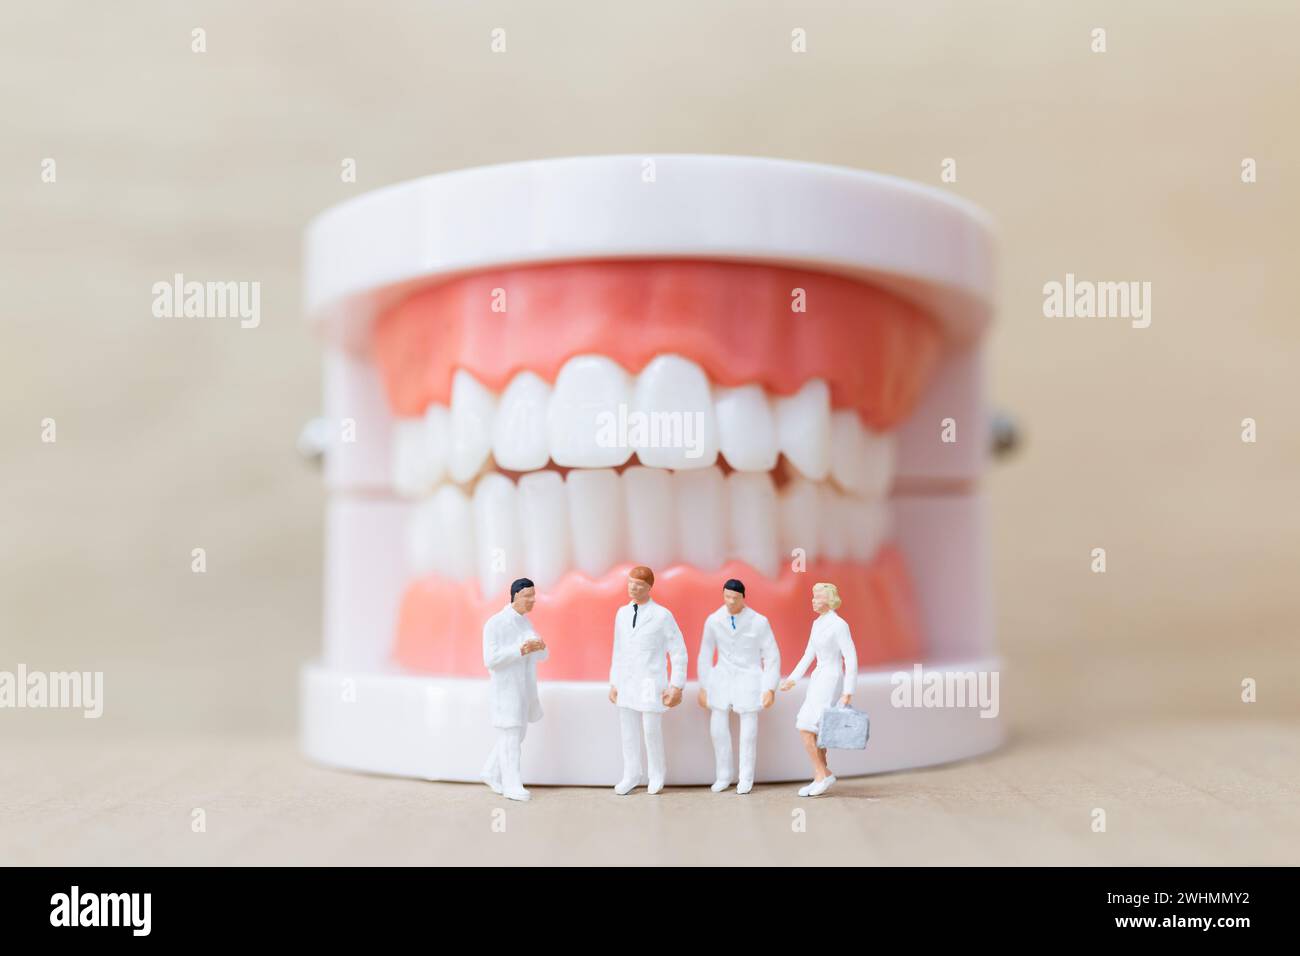 Miniature people : dentist and nurse observing and discussing about human teeth with gums and enamel Stock Photo